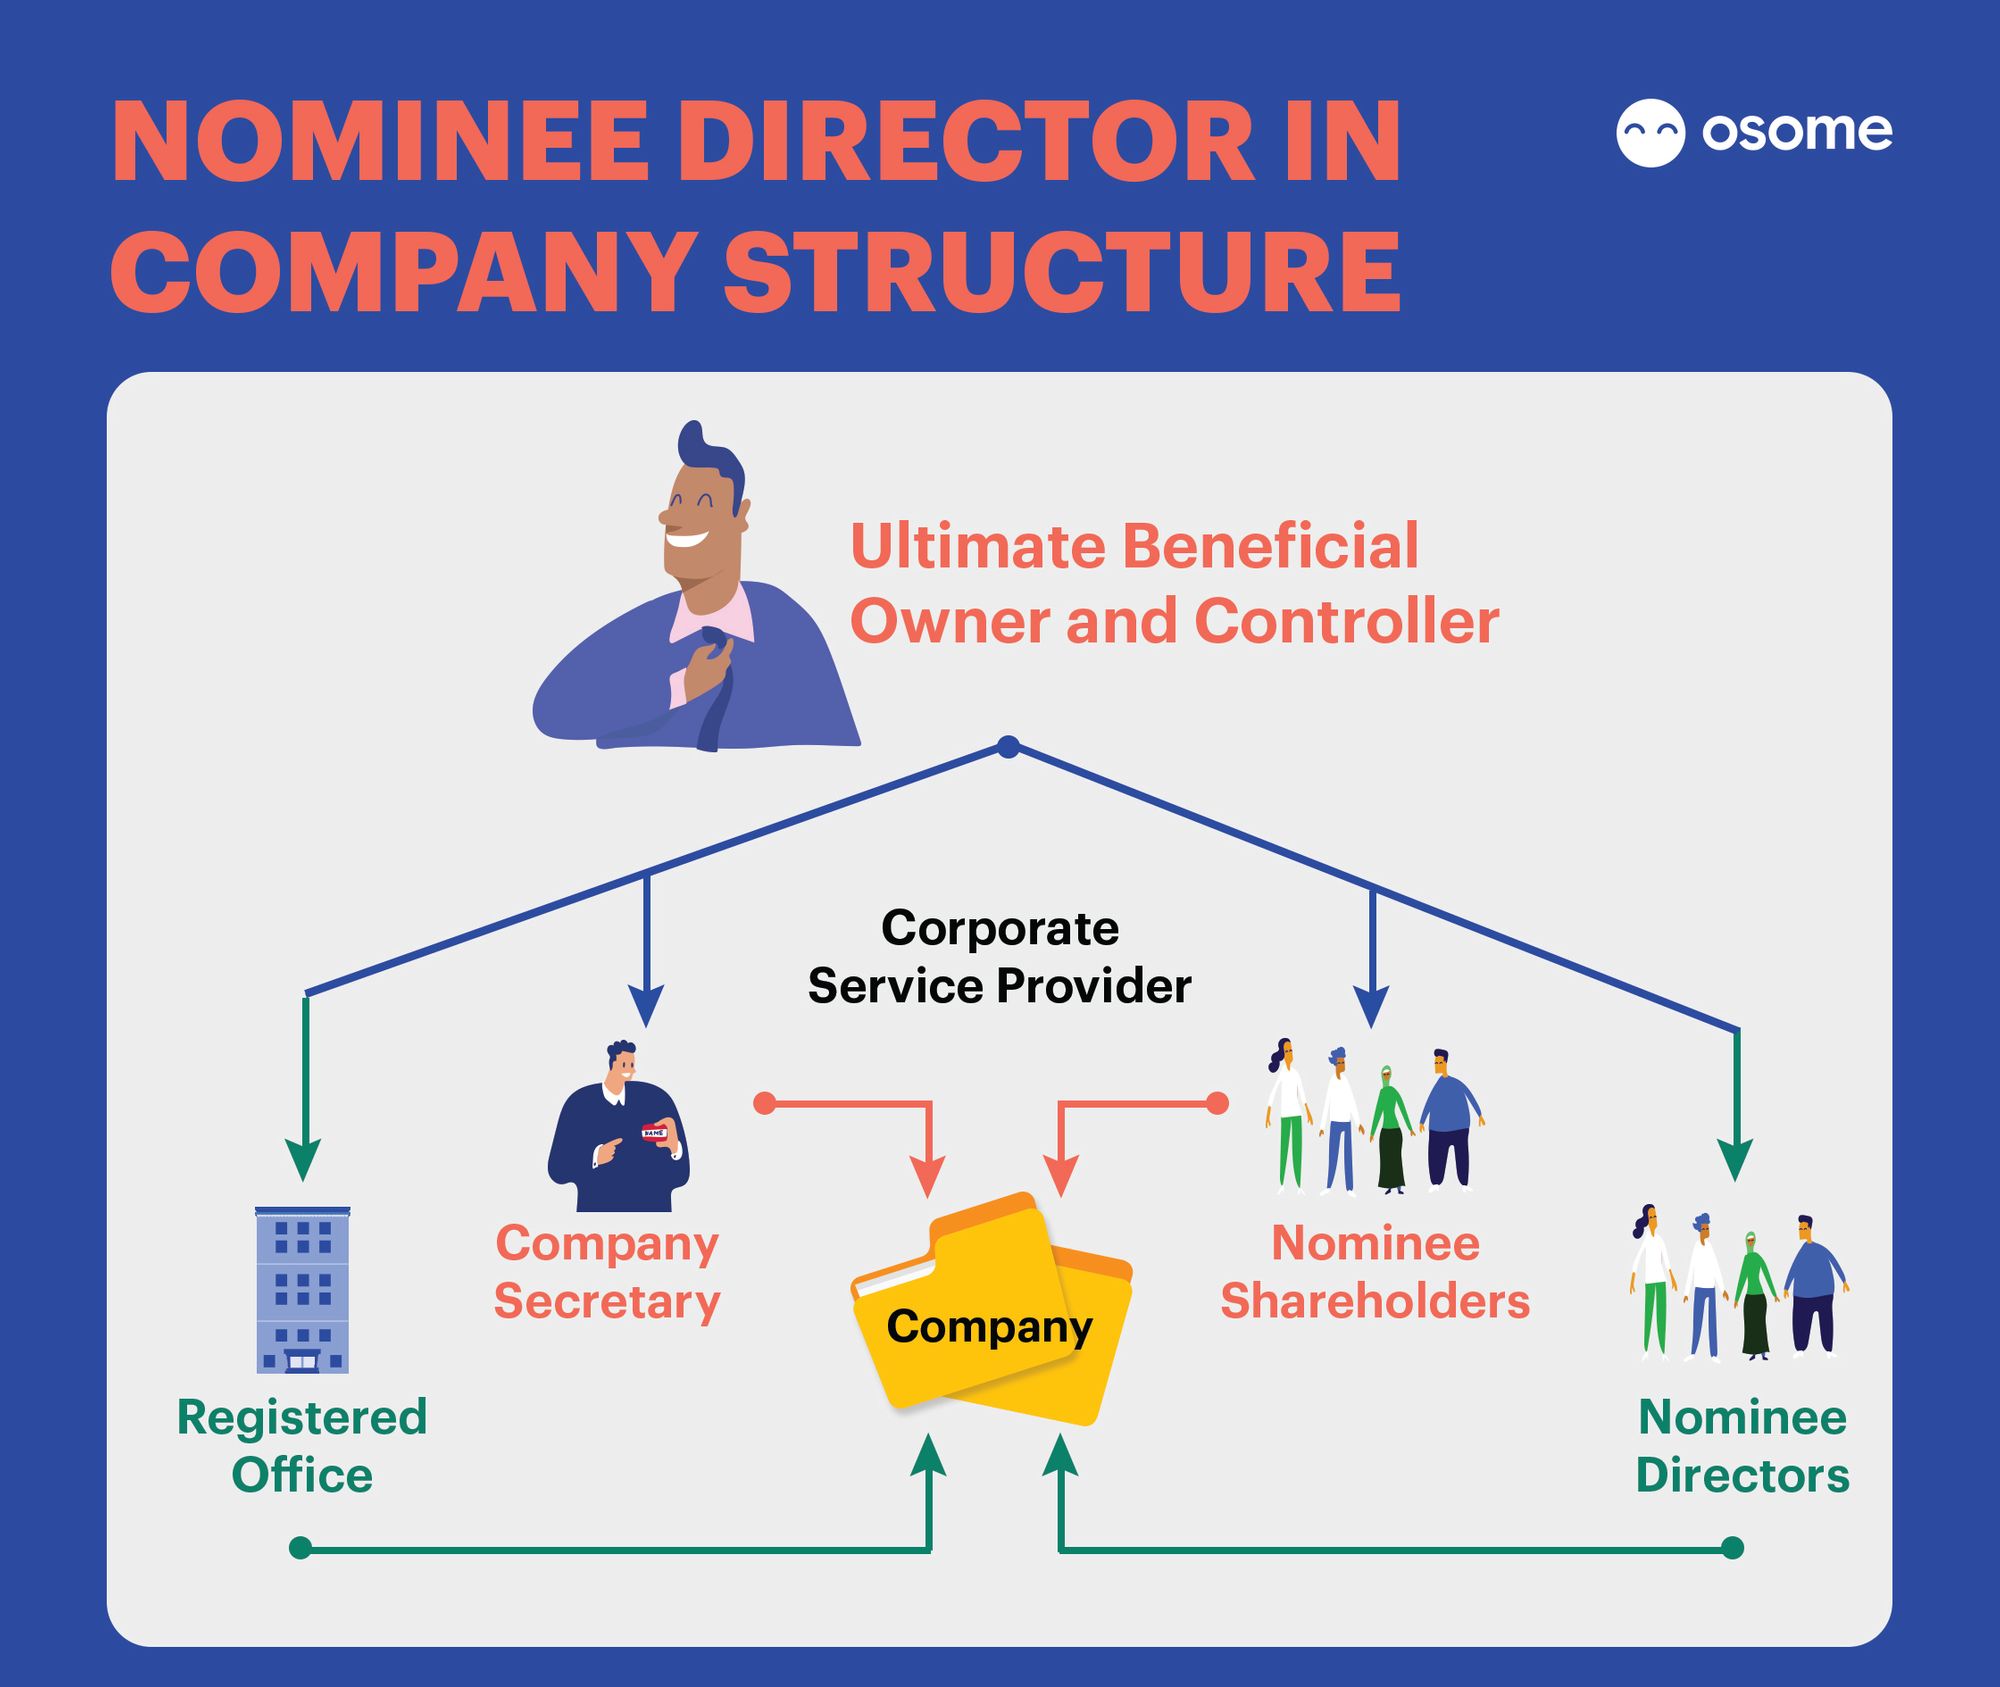 Nominee Director in Company Structure